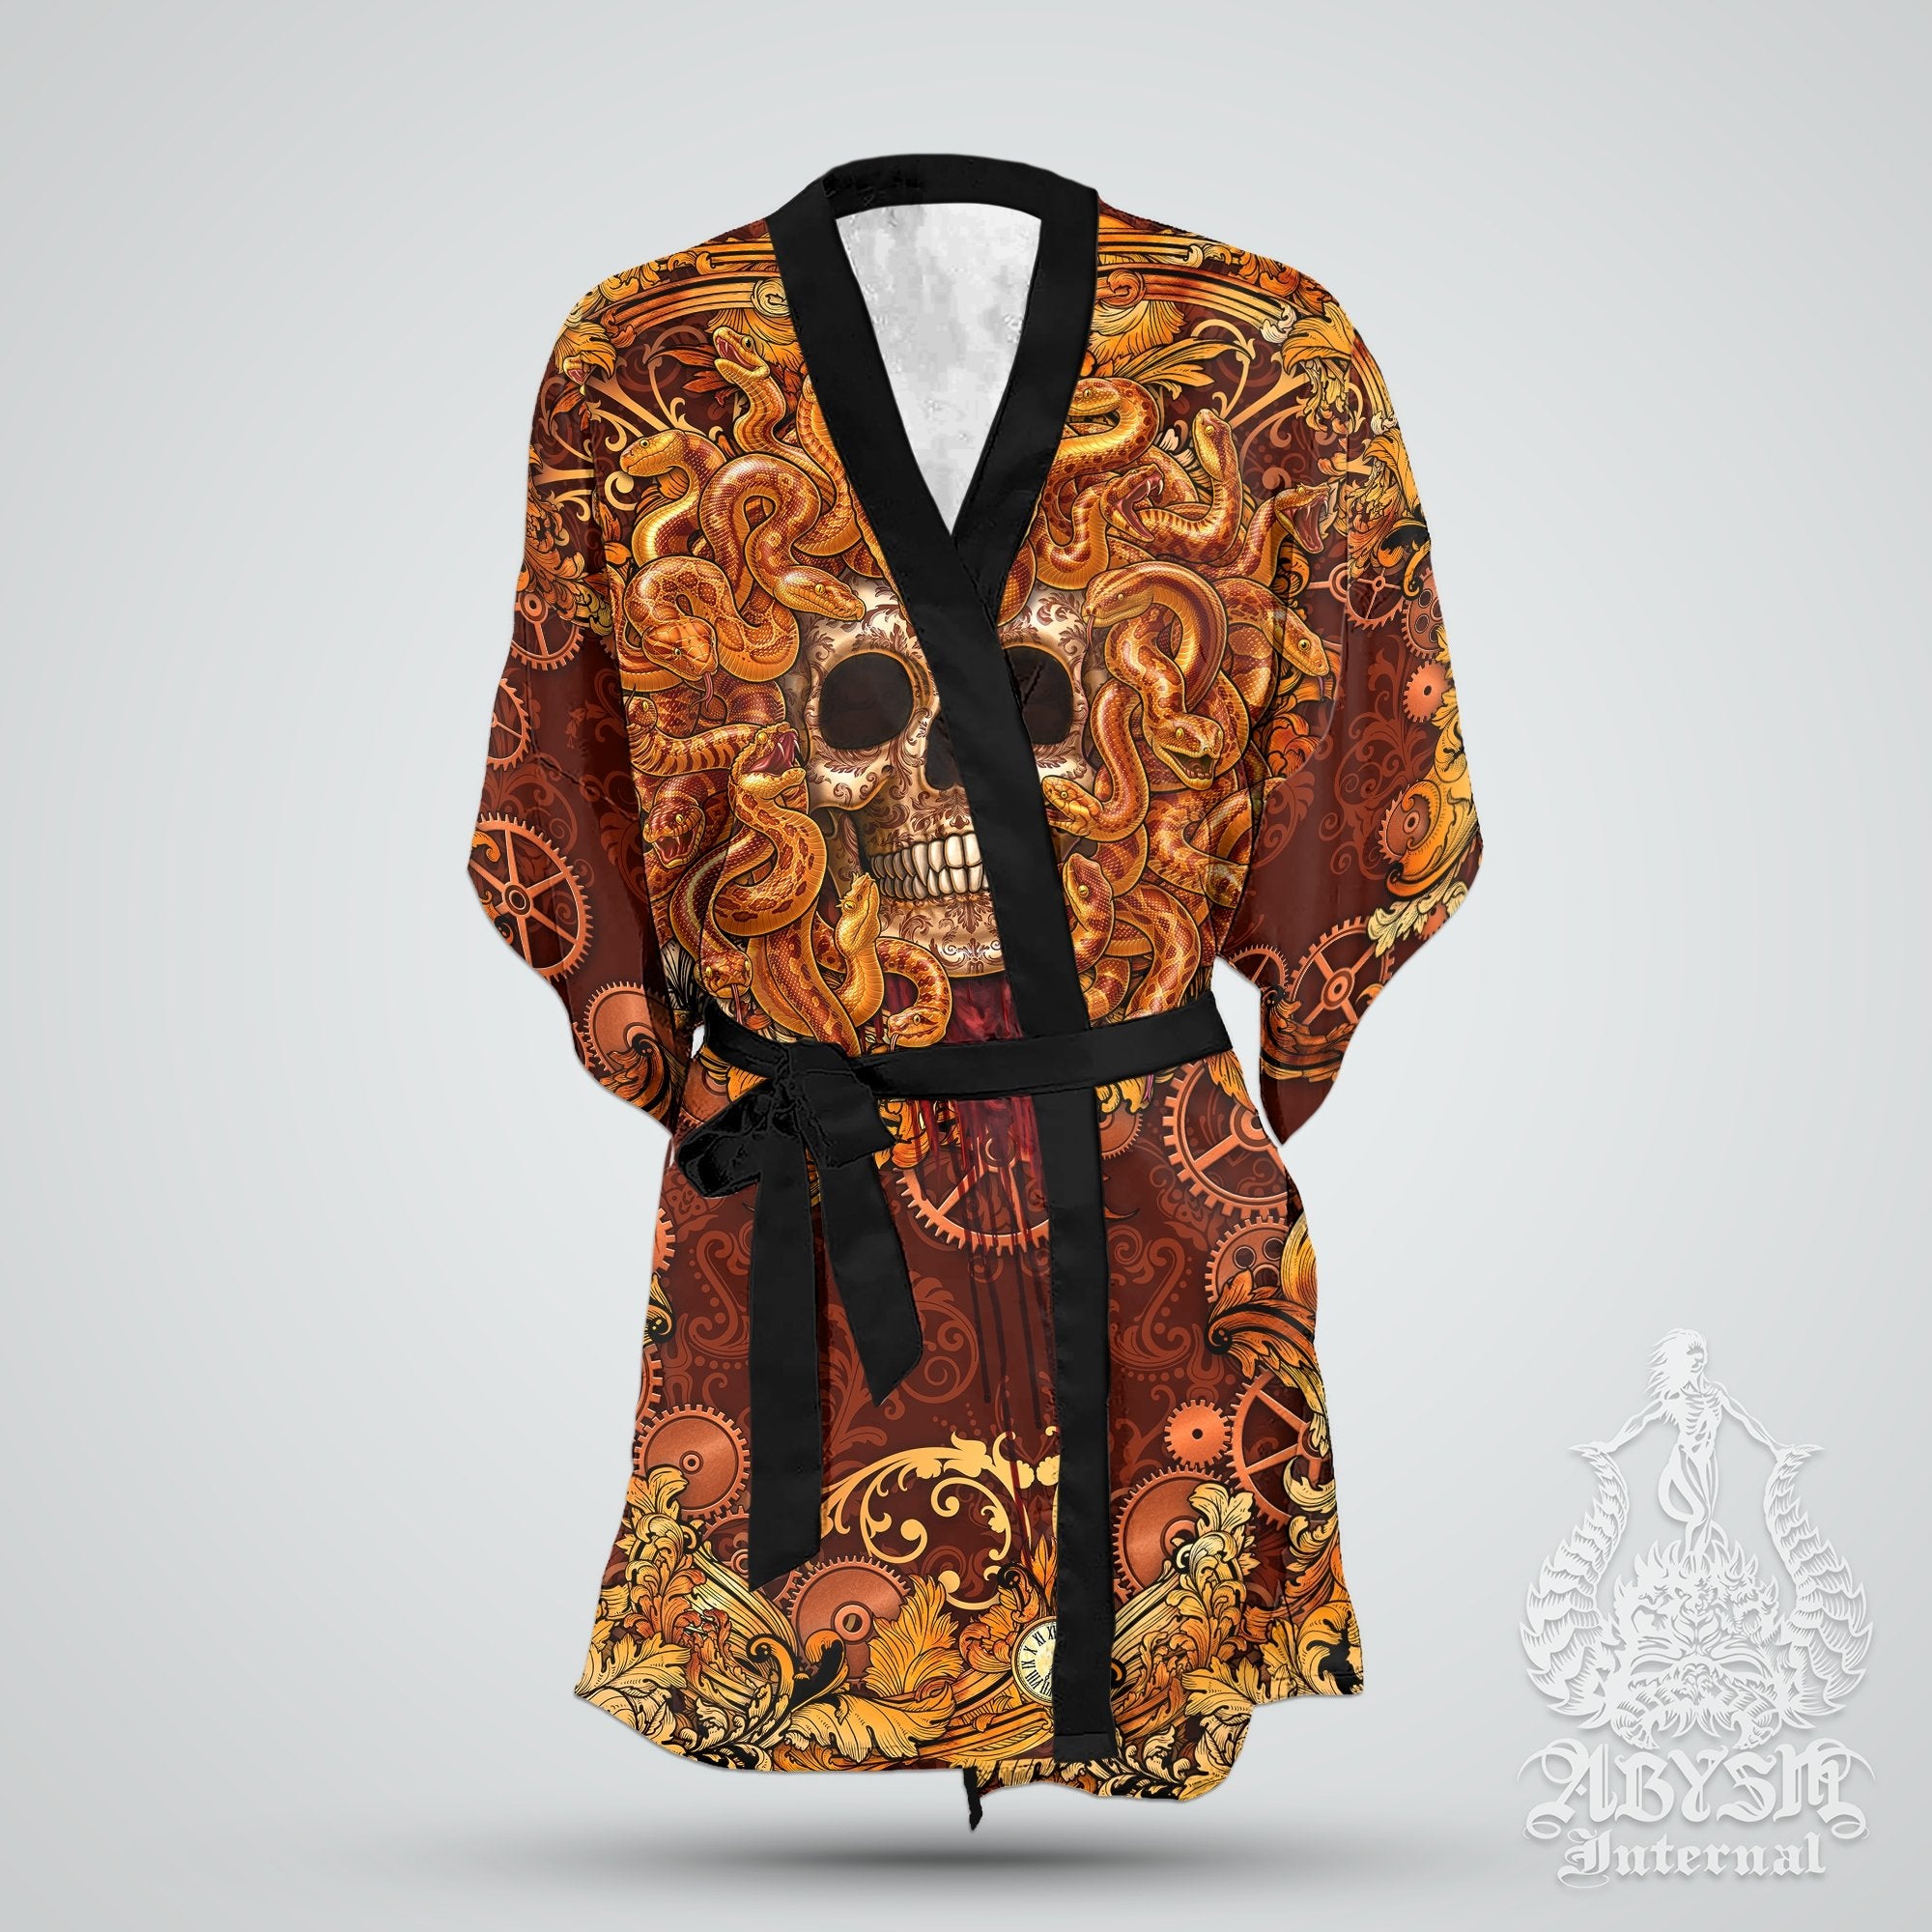 Medusa Skull Cover Up, Beach Outfit, Party Kimono, Summer Festival Robe, Indie and Alternative Clothing, Unisex - Steampunk - Abysm Internal